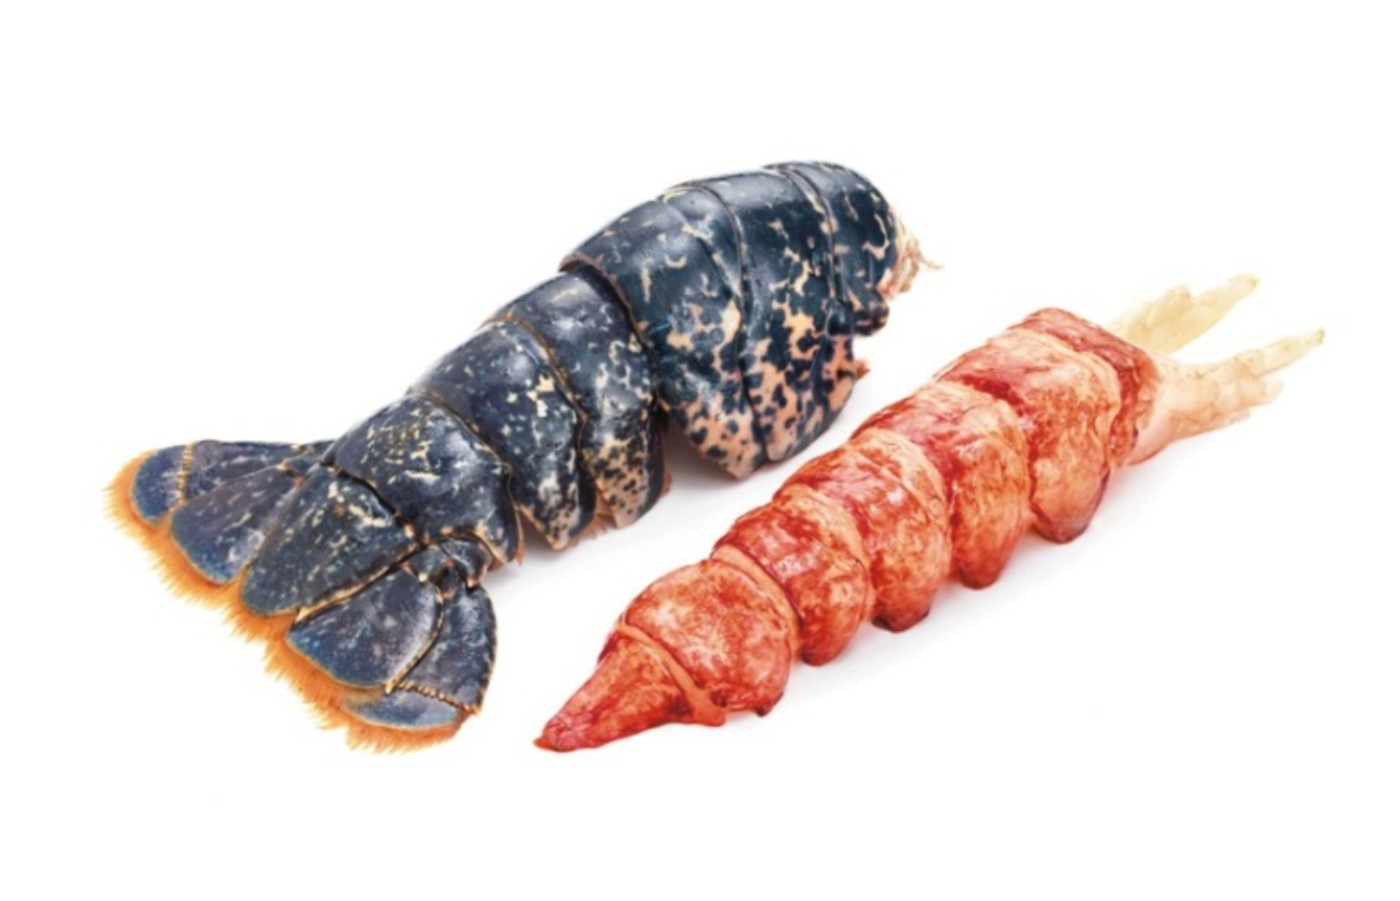 Lobster Tails Shelled